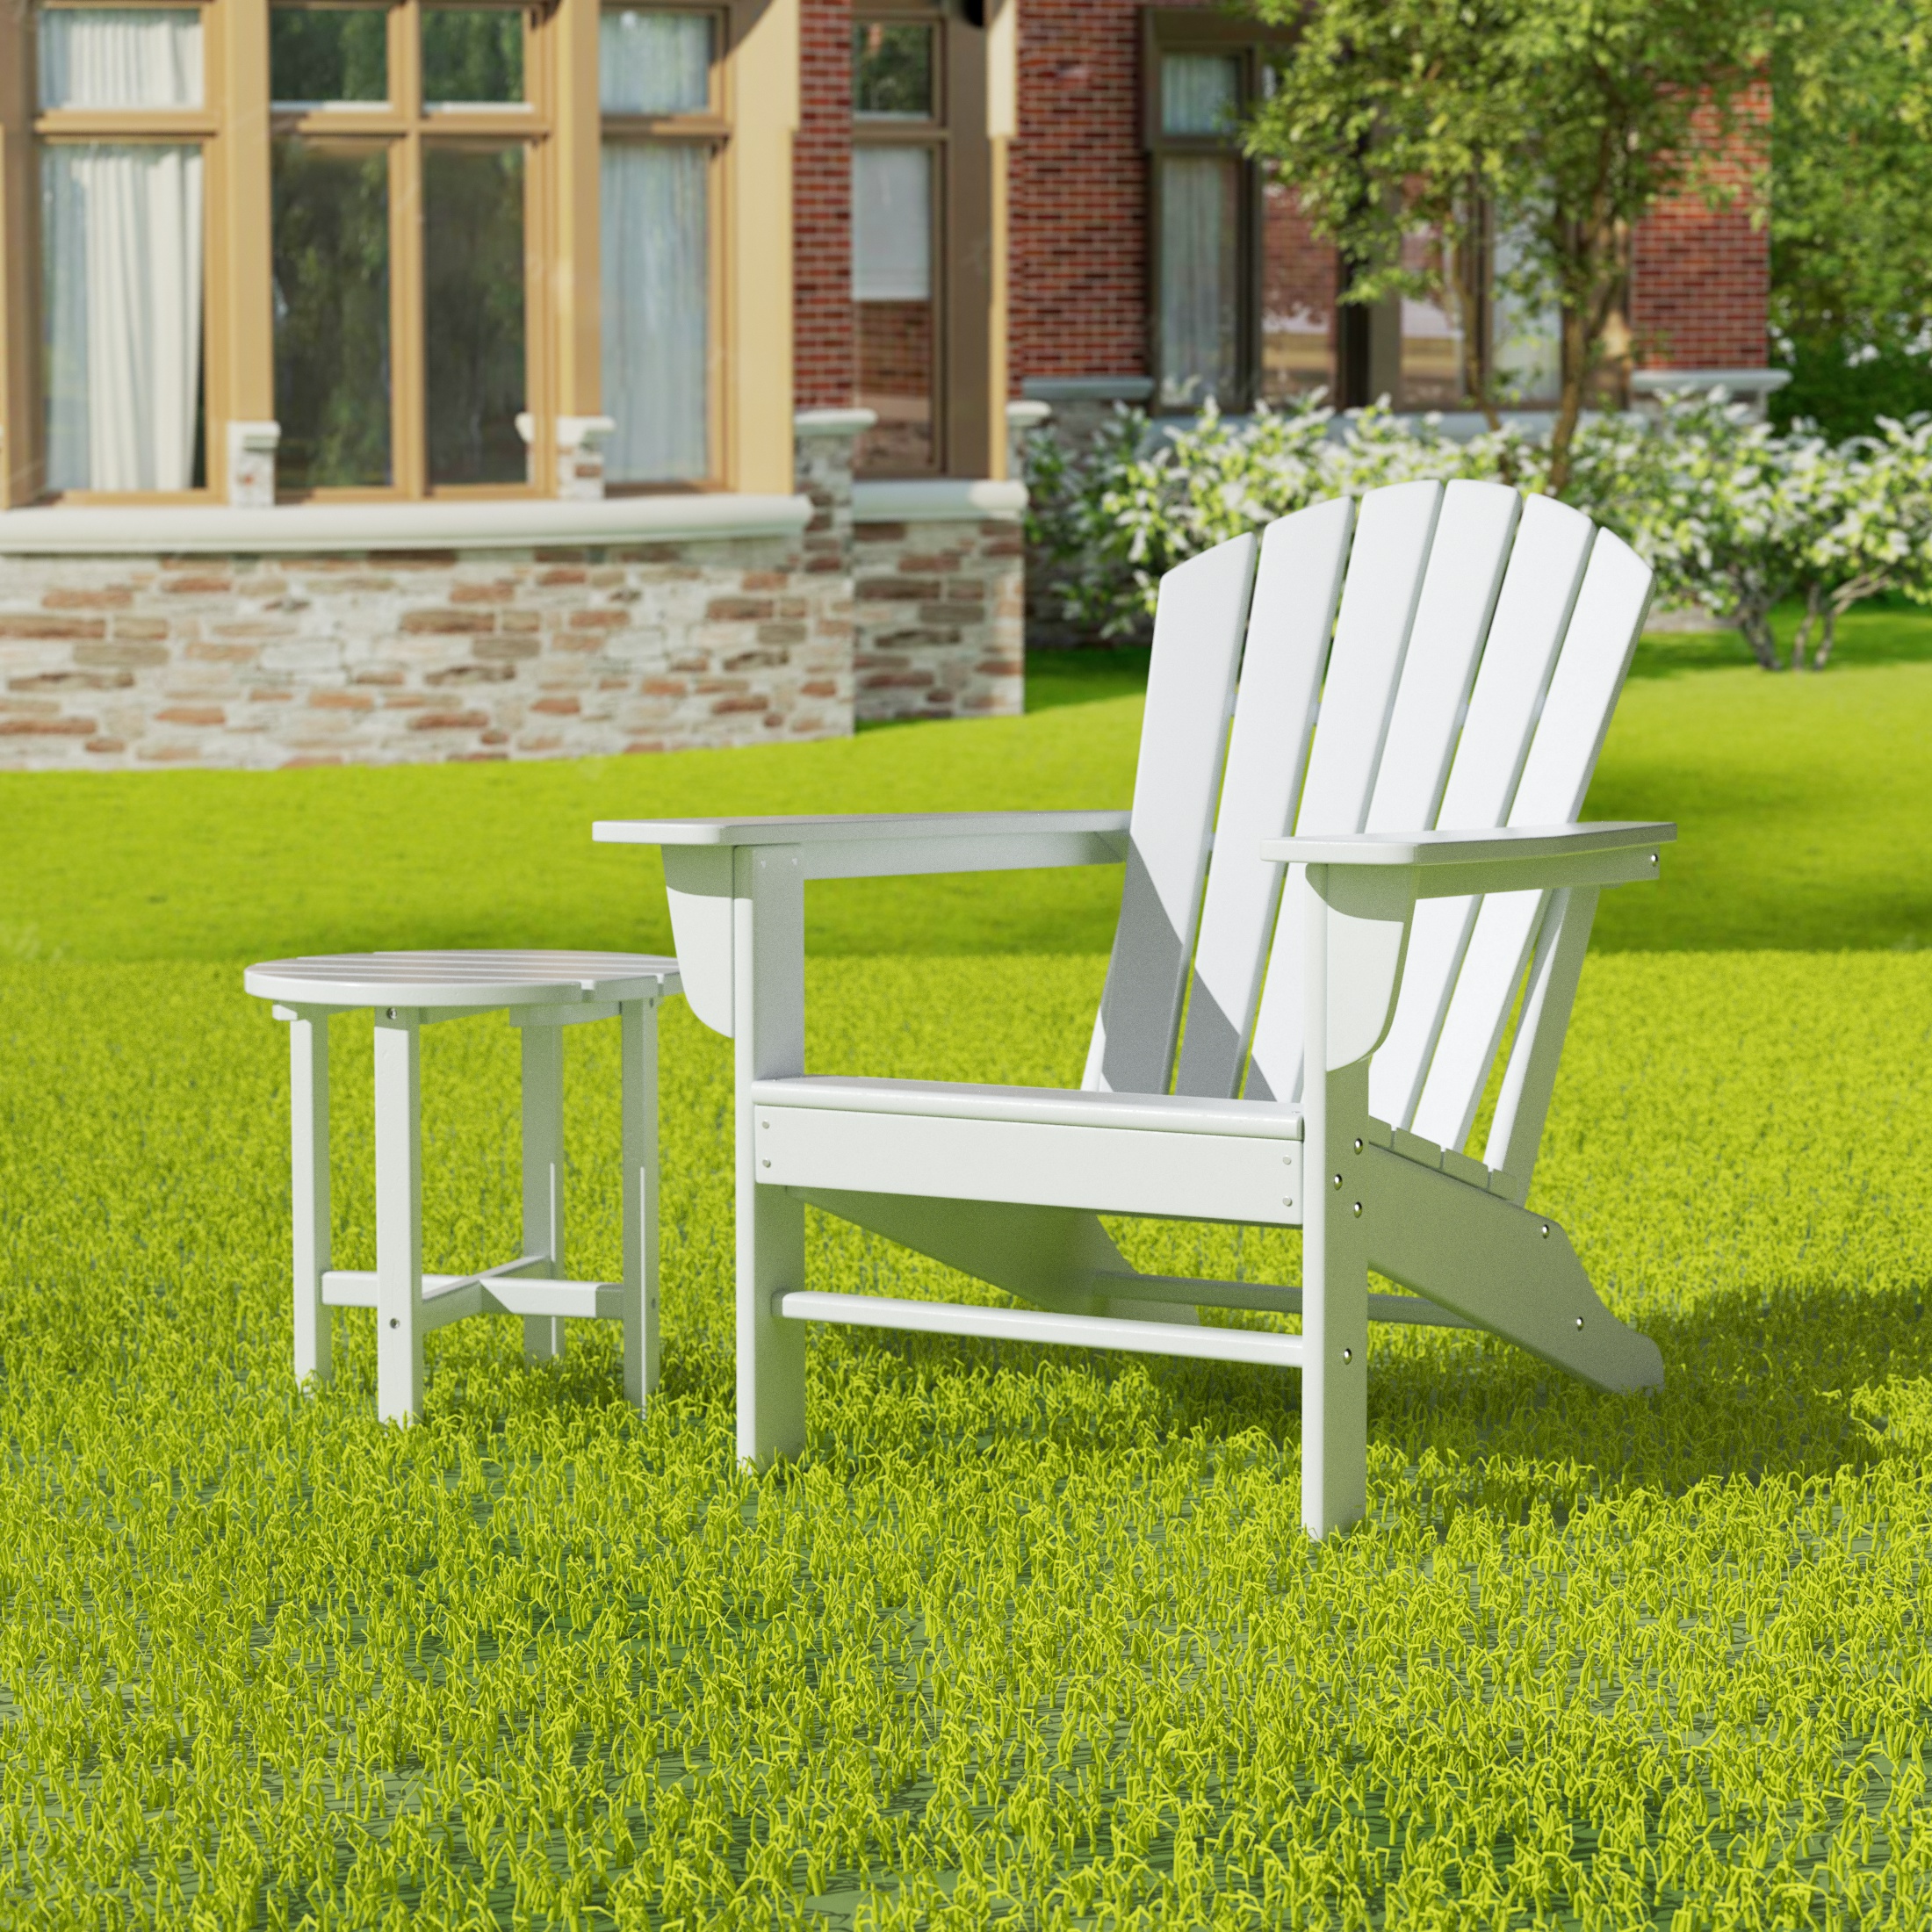 Westin Outdoor with Side Table HDPE Plastic Adirondack Chair - White (Set of 2) - image 1 of 5